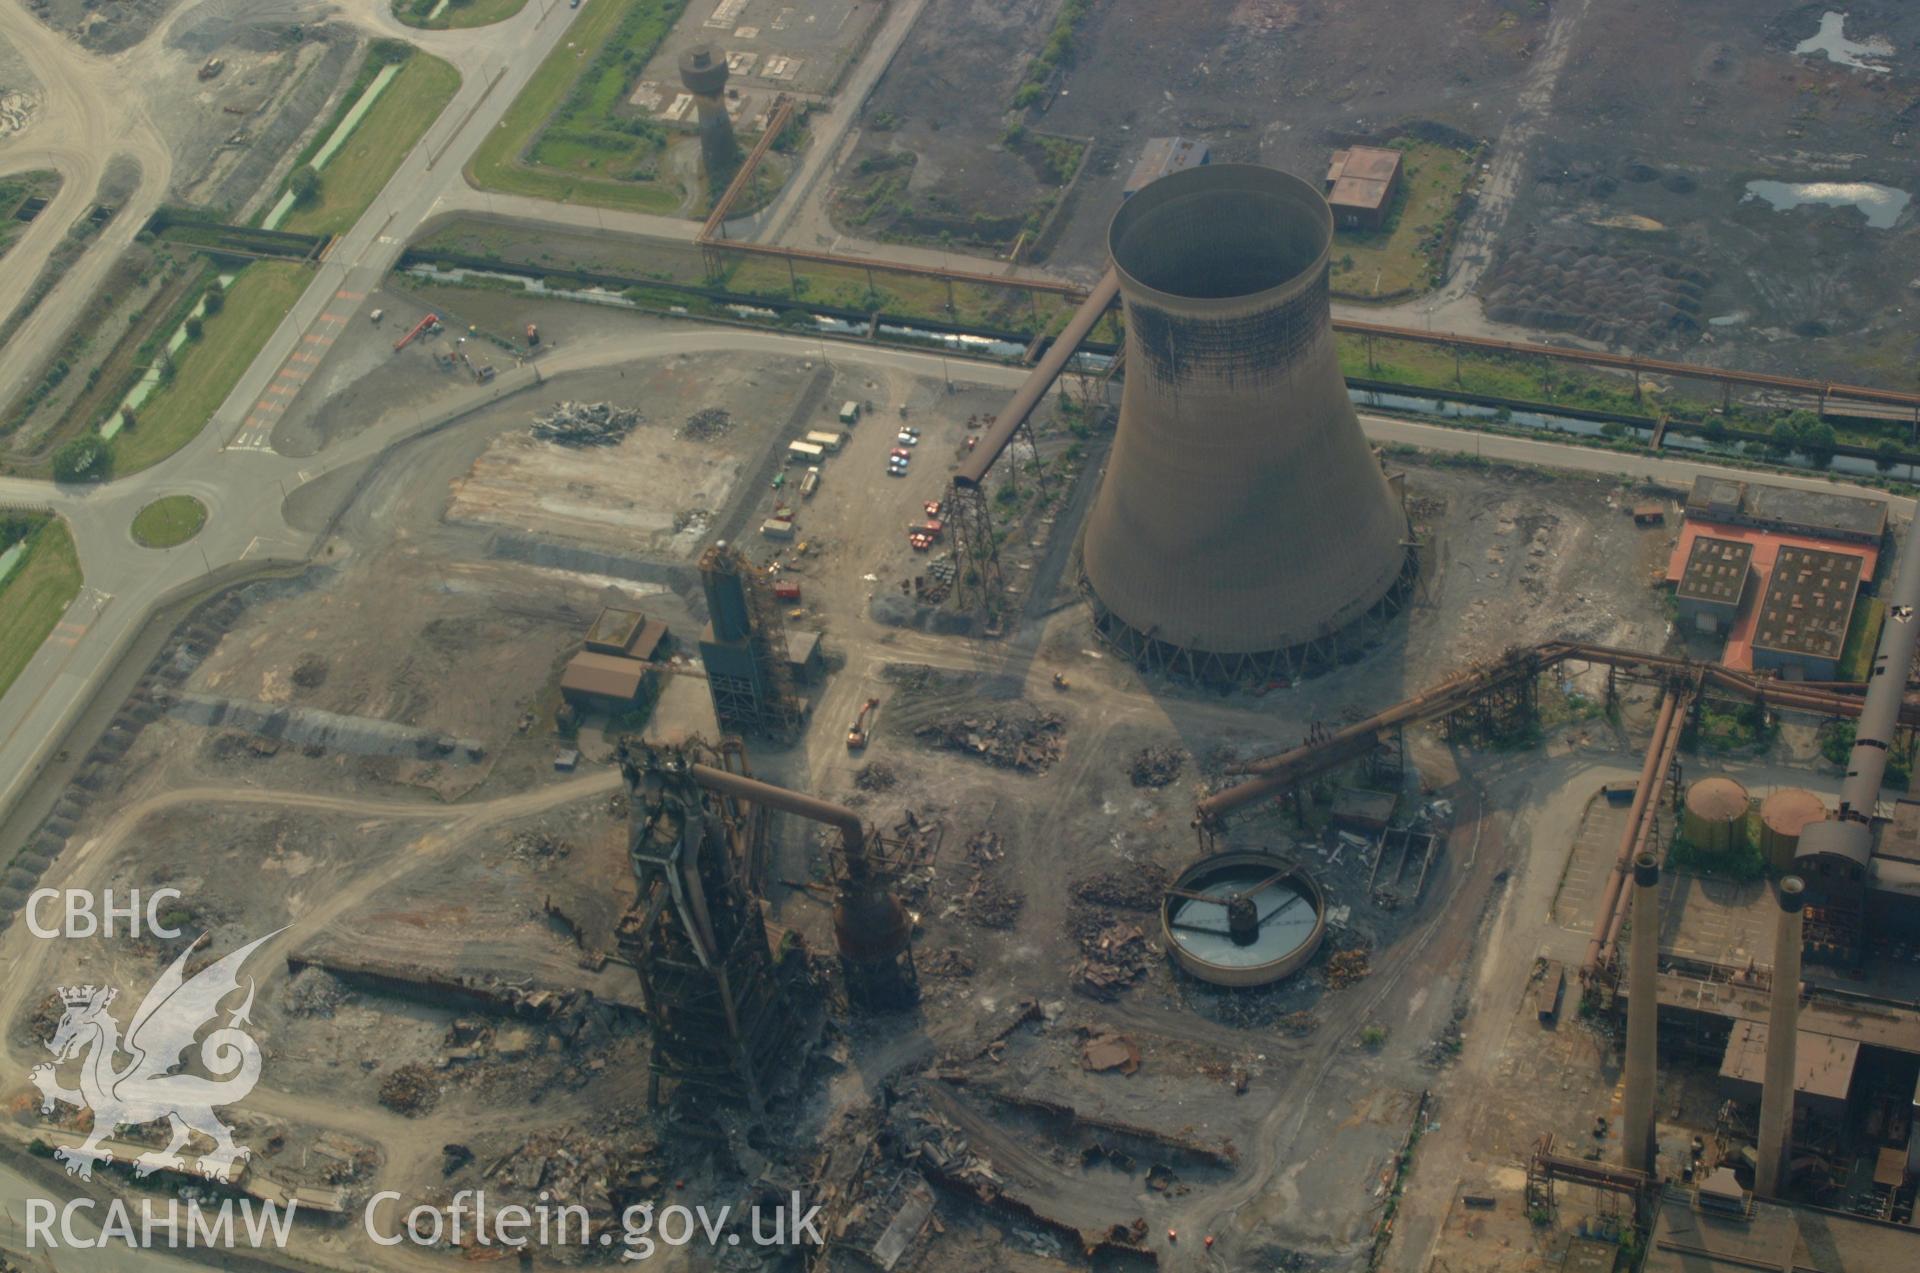 RCAHMW colour oblique aerial photograph of Llanwern Steelworks, at Industrial Complex, Newport. Taken on 26 May 2004 by Toby Driver